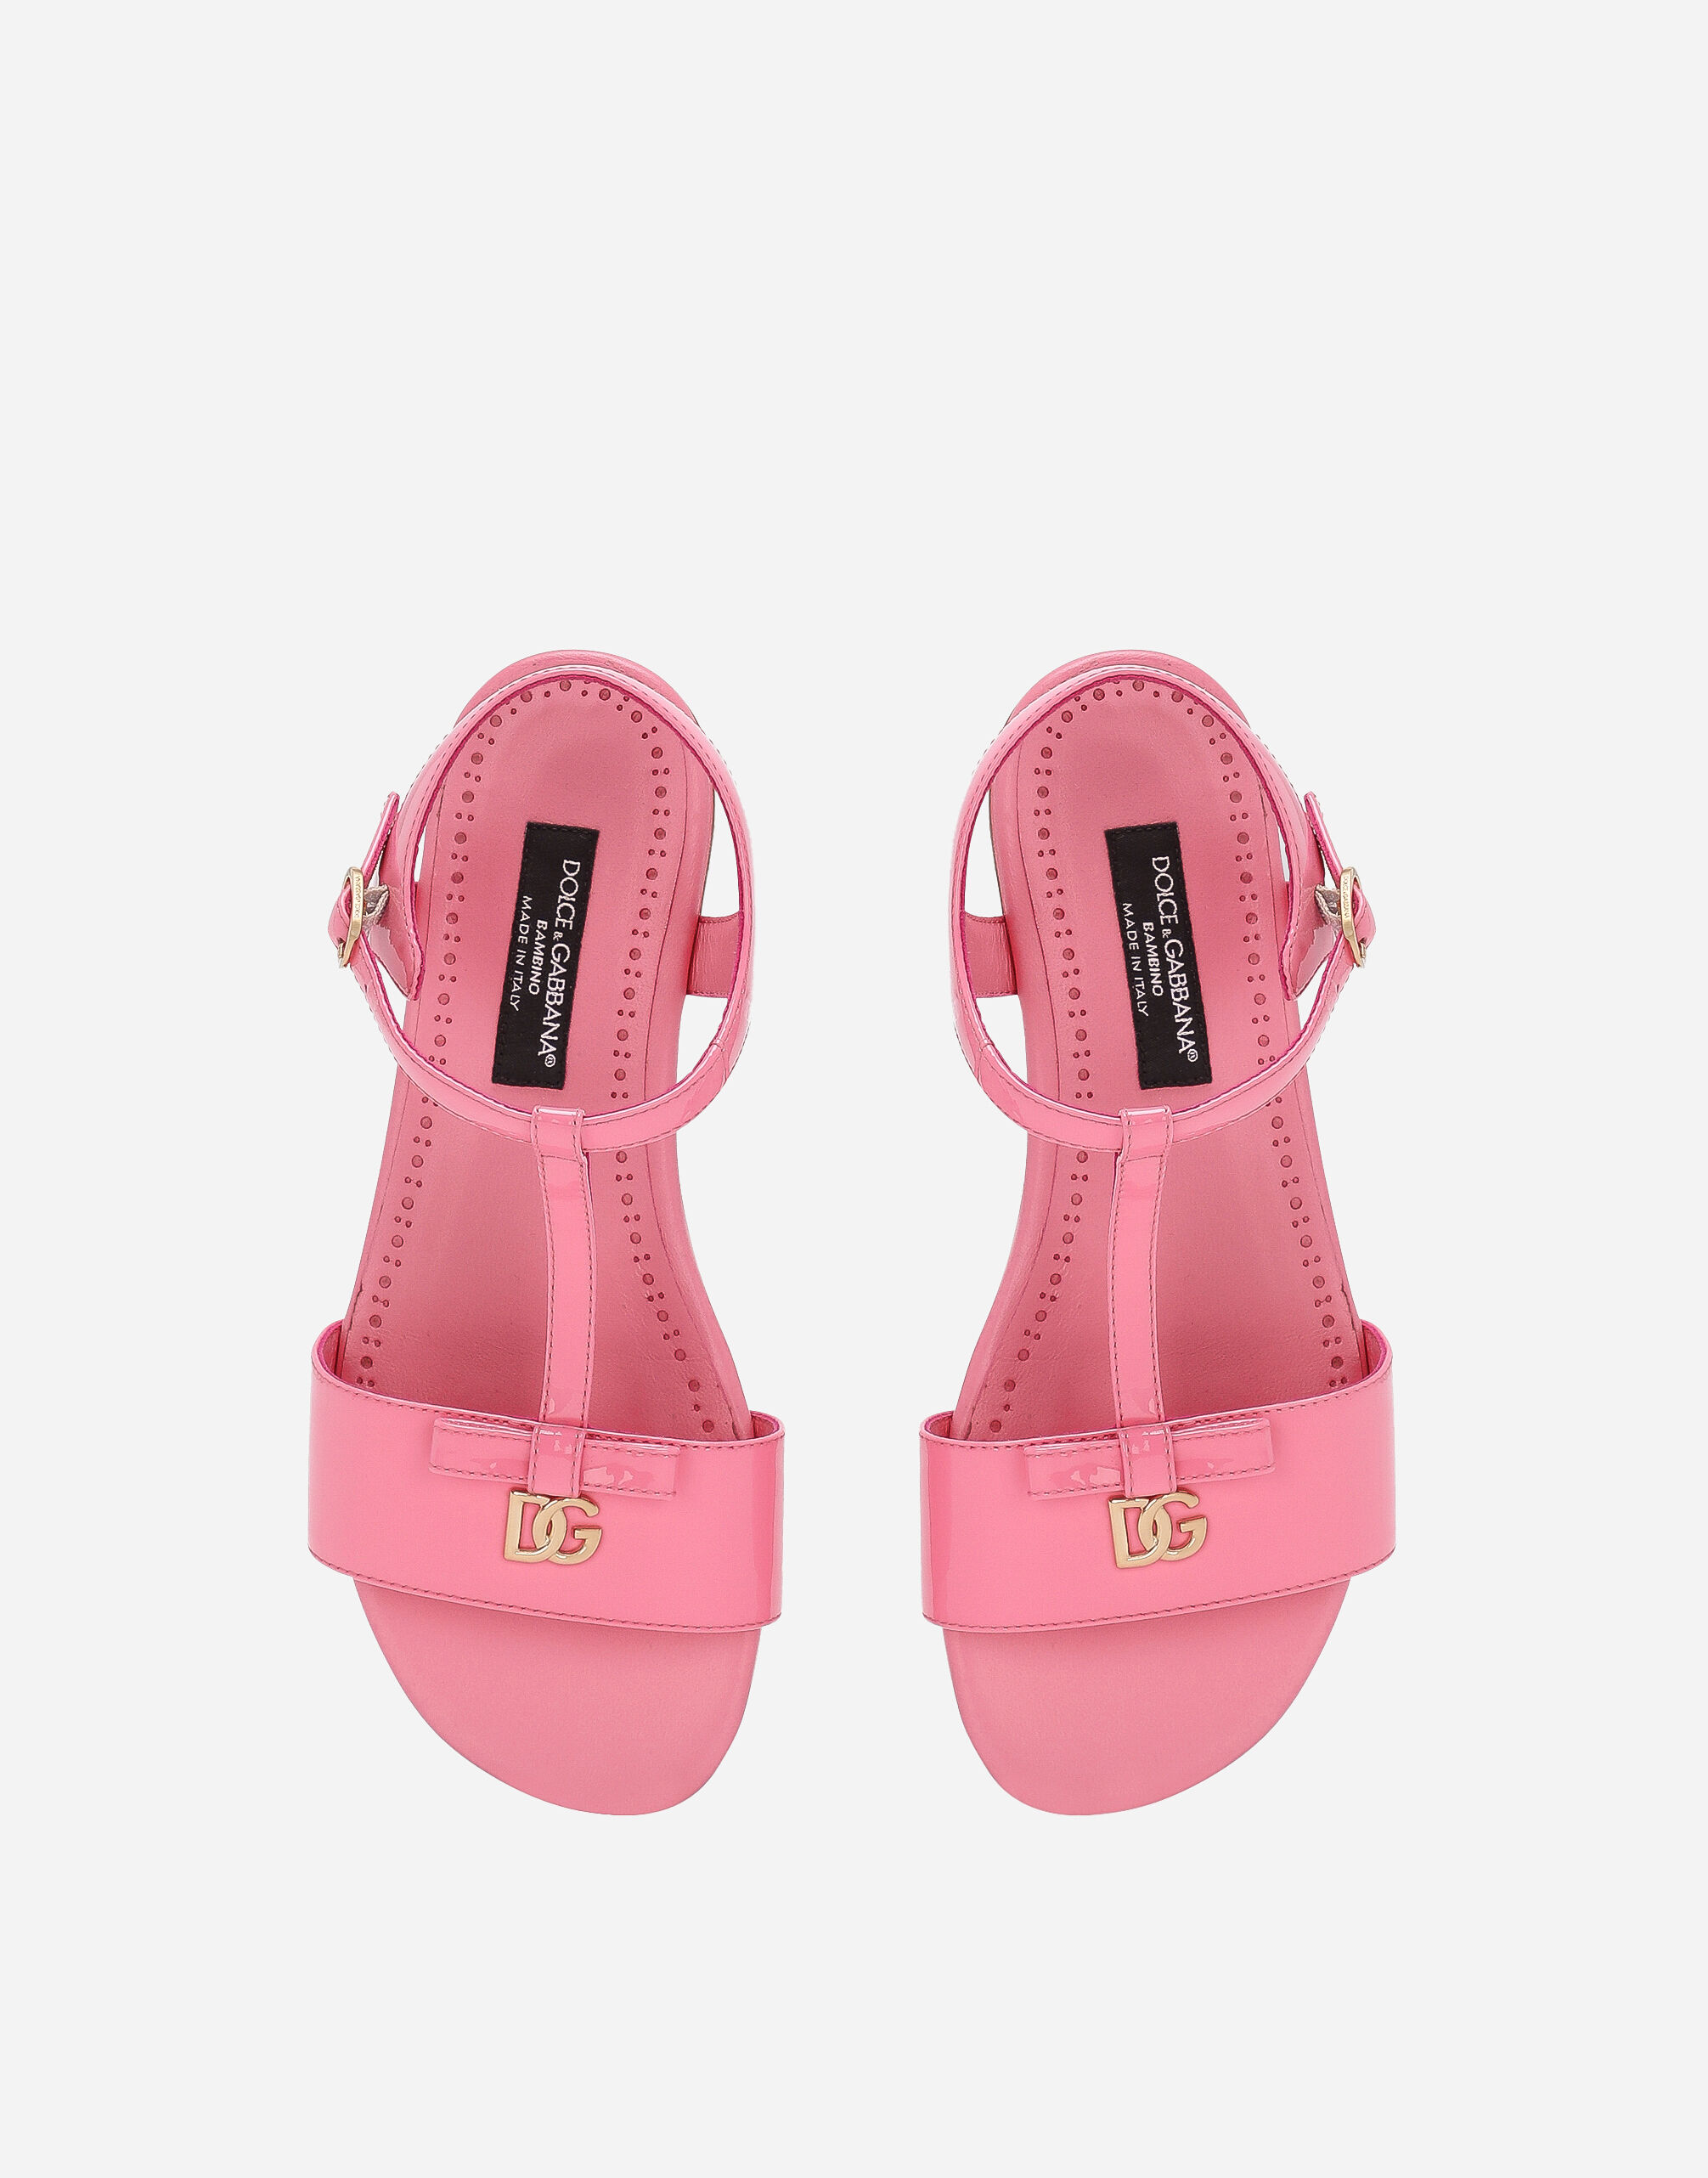 Patent leather sandals in Pink for Girls | Dolceu0026Gabbana®